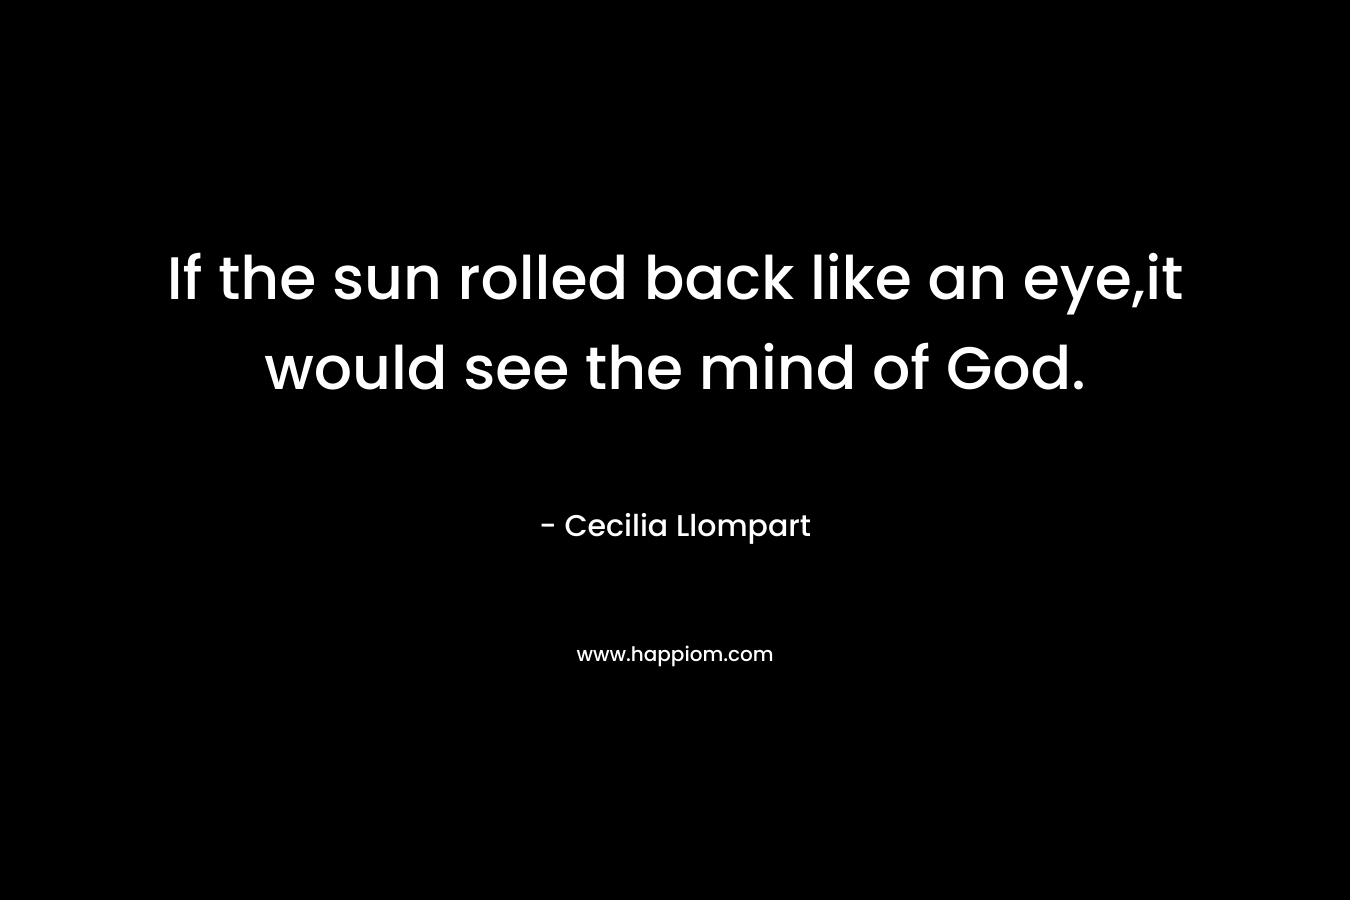 If the sun rolled back like an eye,it would see the mind of God. – Cecilia Llompart